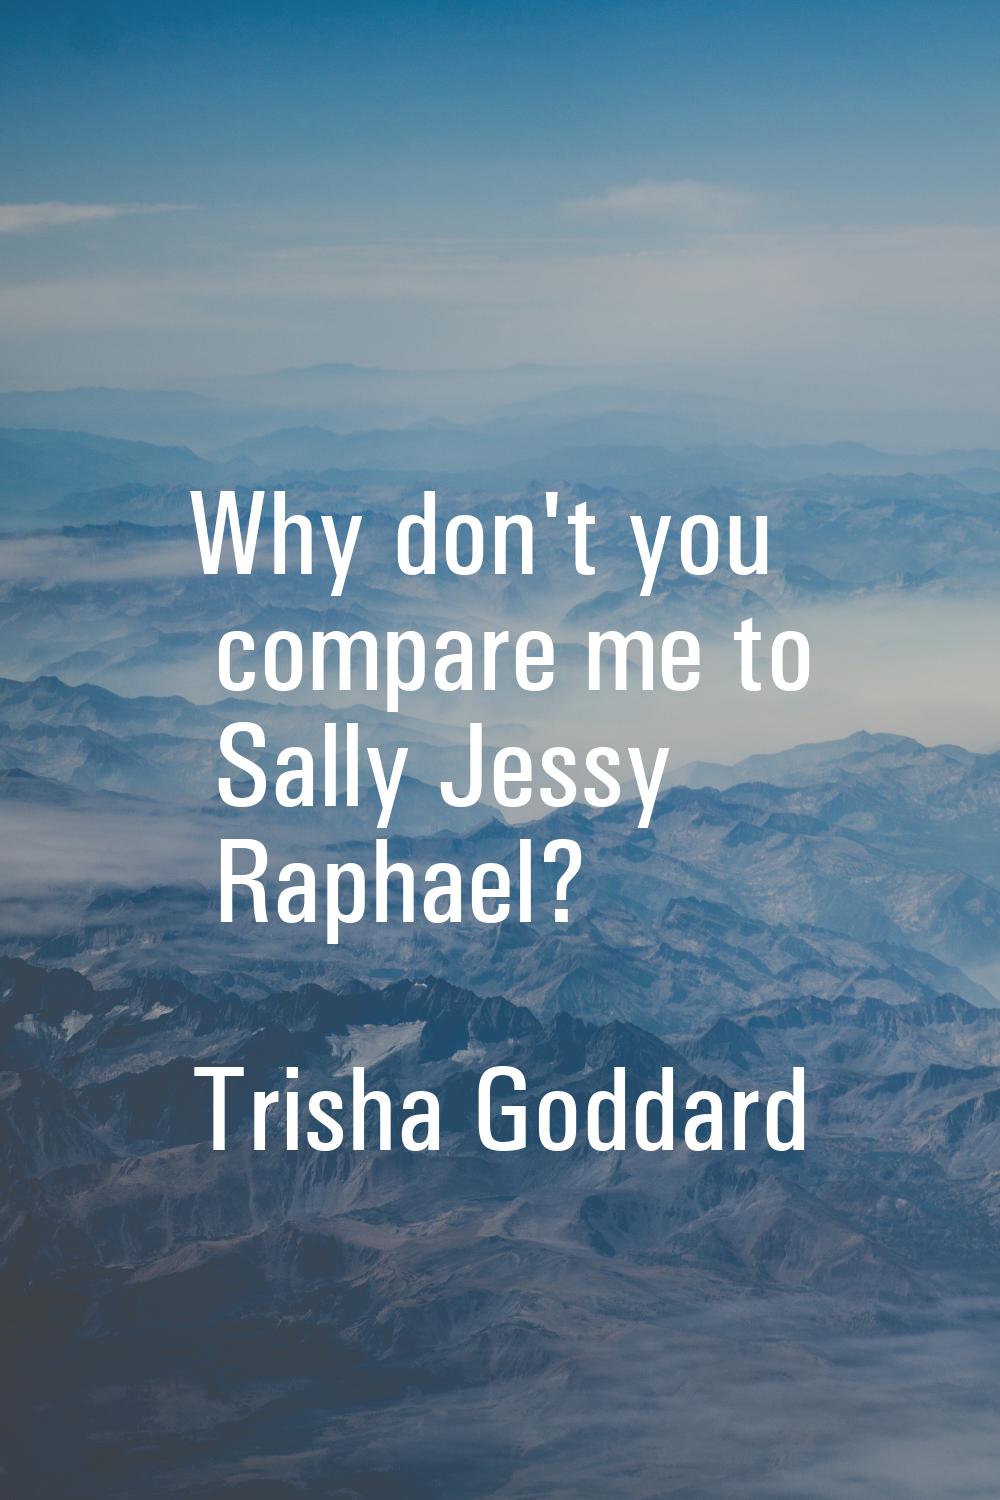 Why don't you compare me to Sally Jessy Raphael?